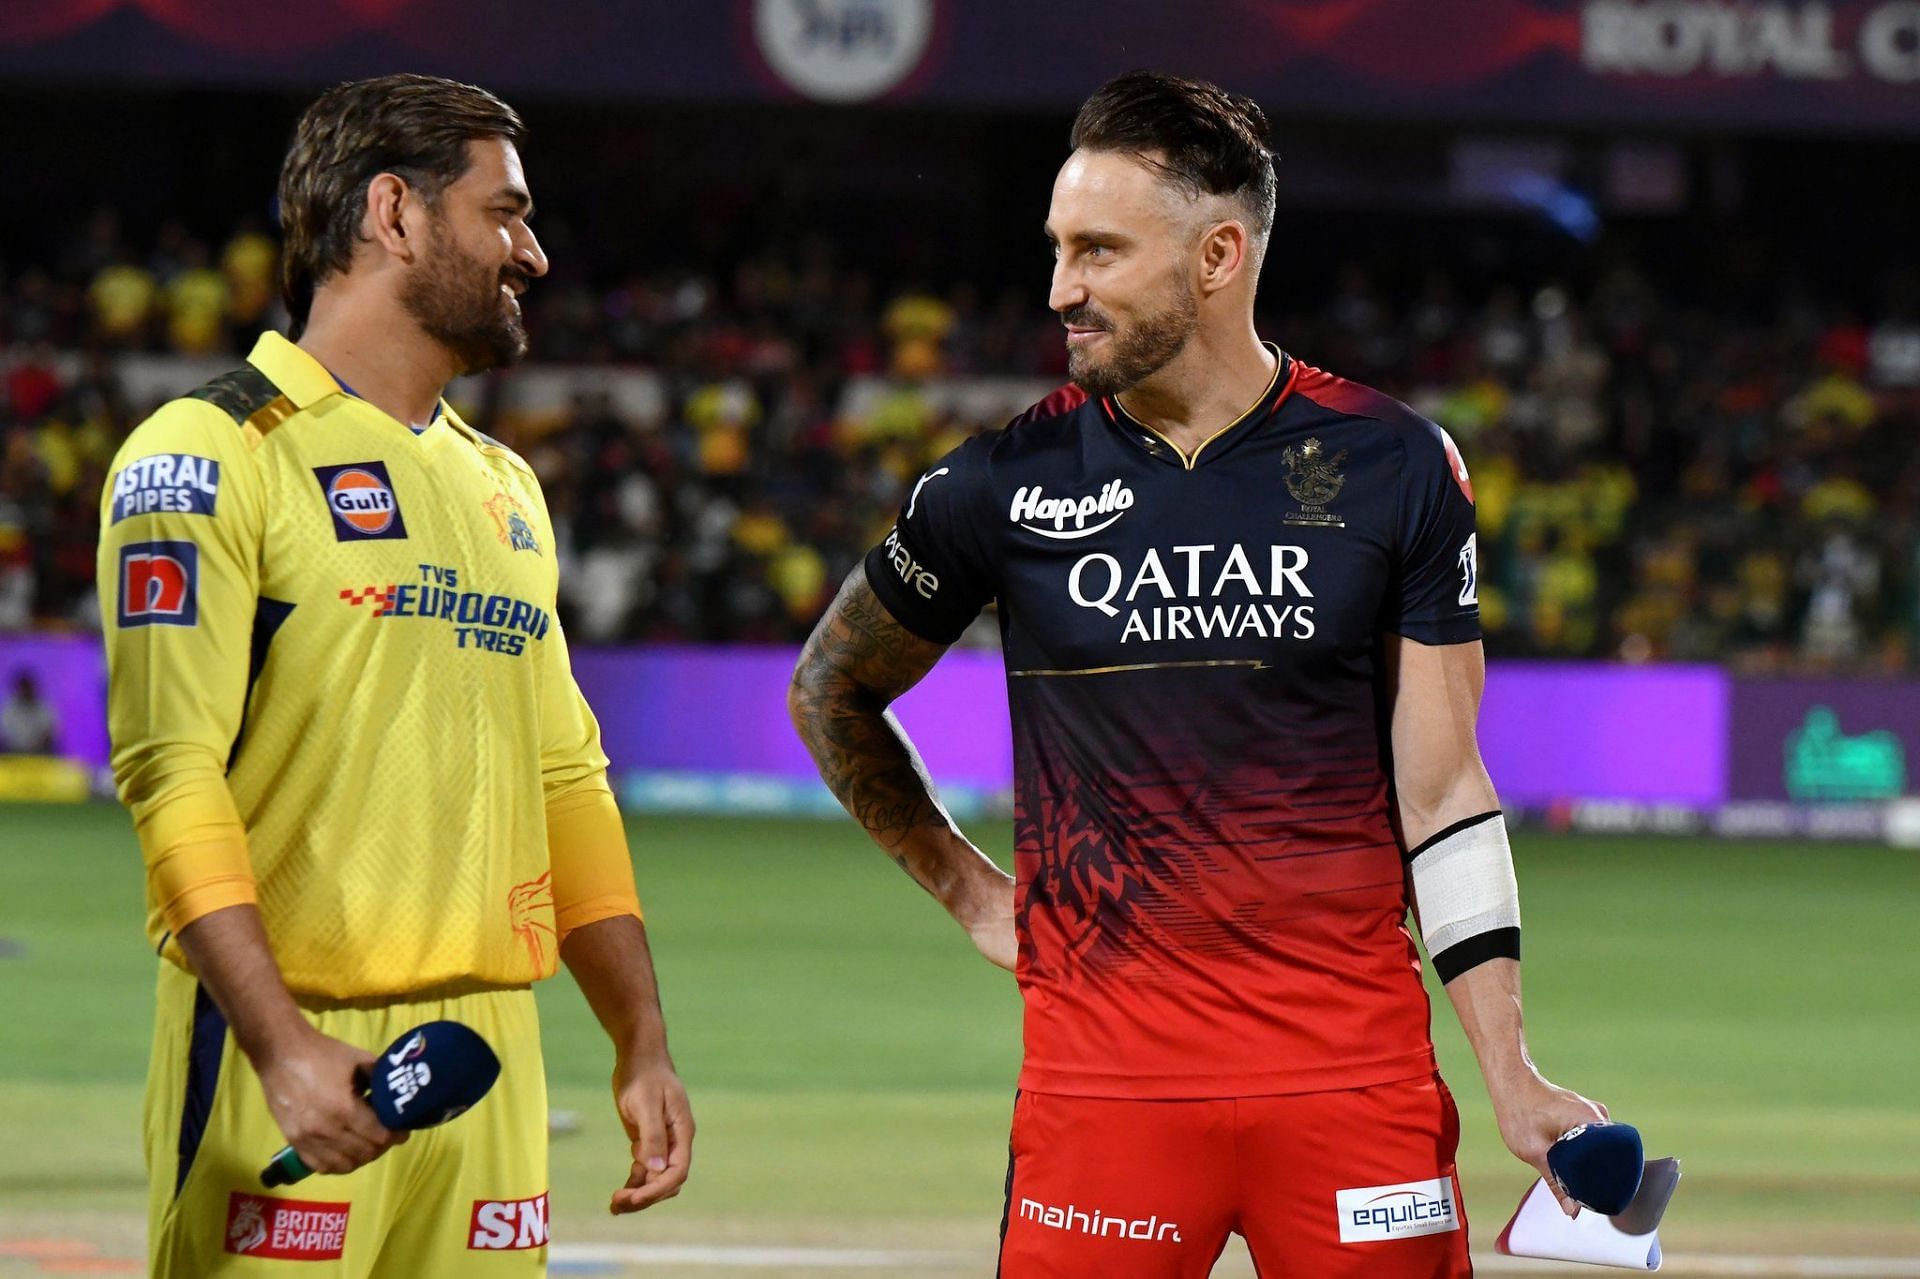 Fans are excited with two heavyweights in RCB and CSK locking horns with each other so early in the tournament.